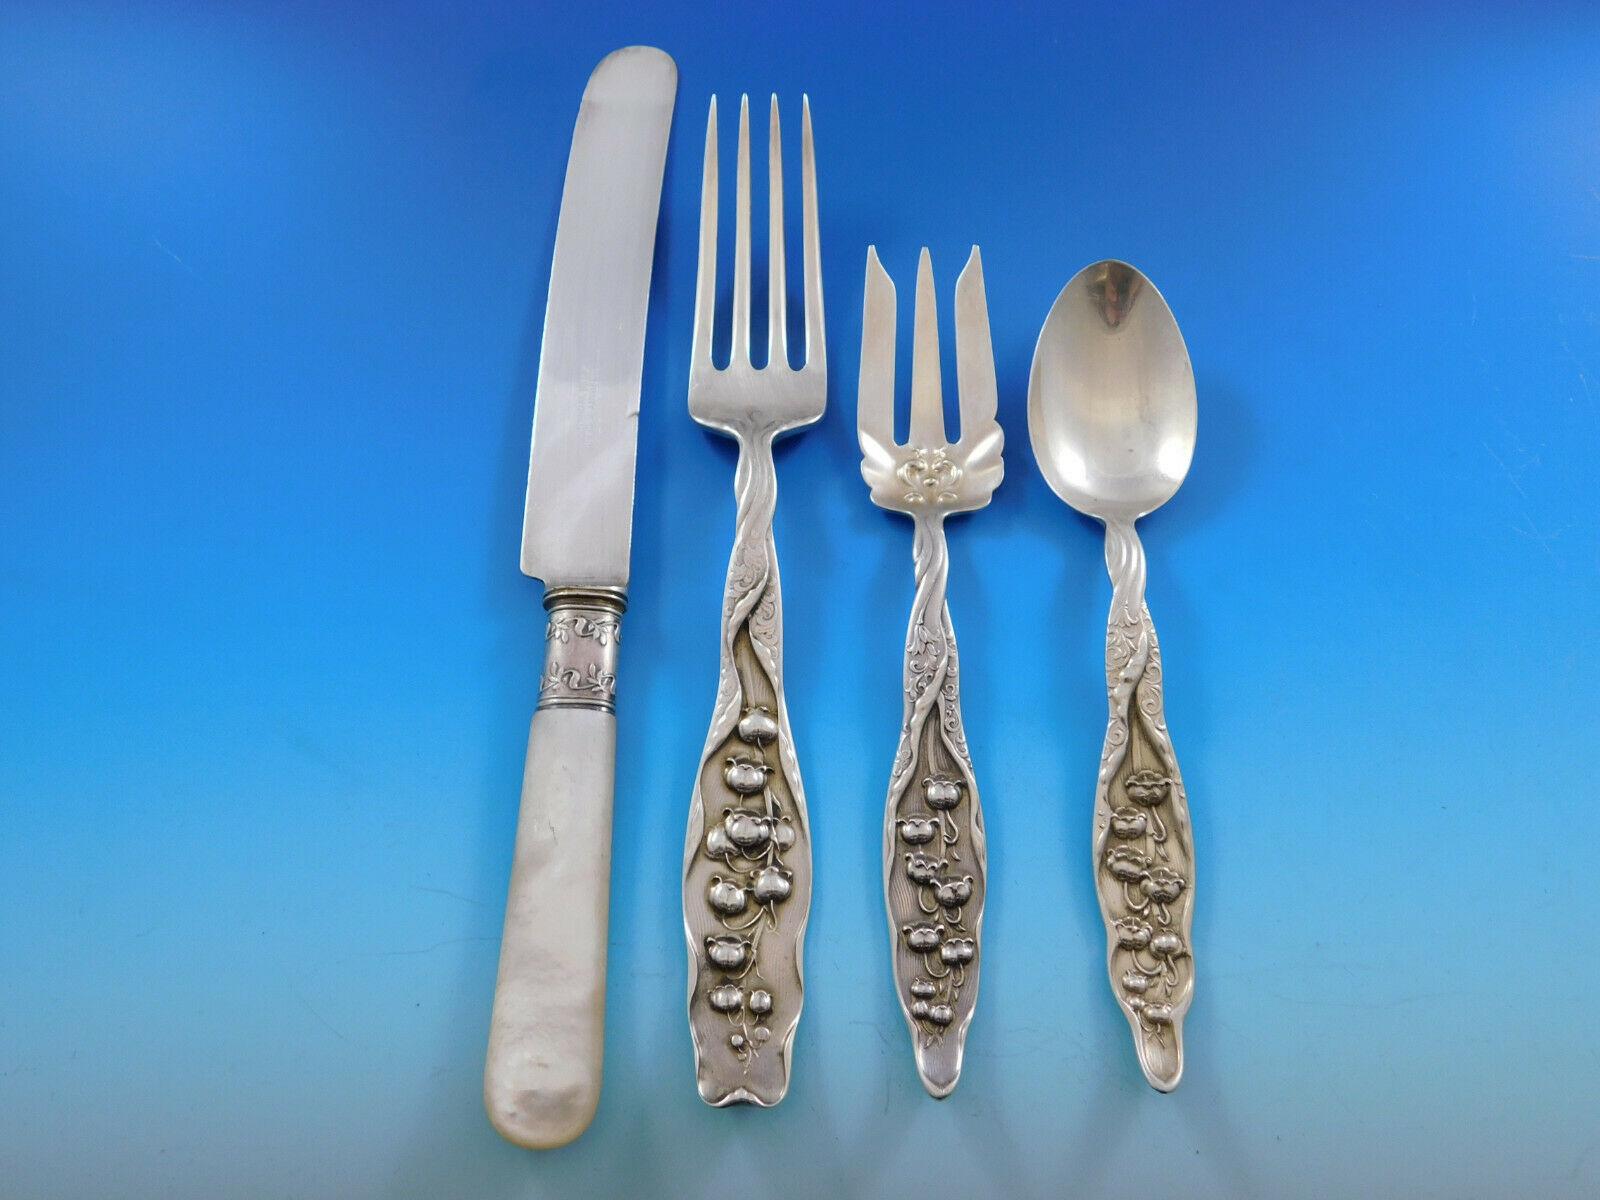 Art Nouveau lily of the valley by Whiting, circa 1885, sterling silver Flatware set - 98 Pieces. This set includes:


8 knives, mother of pearl handle, 9